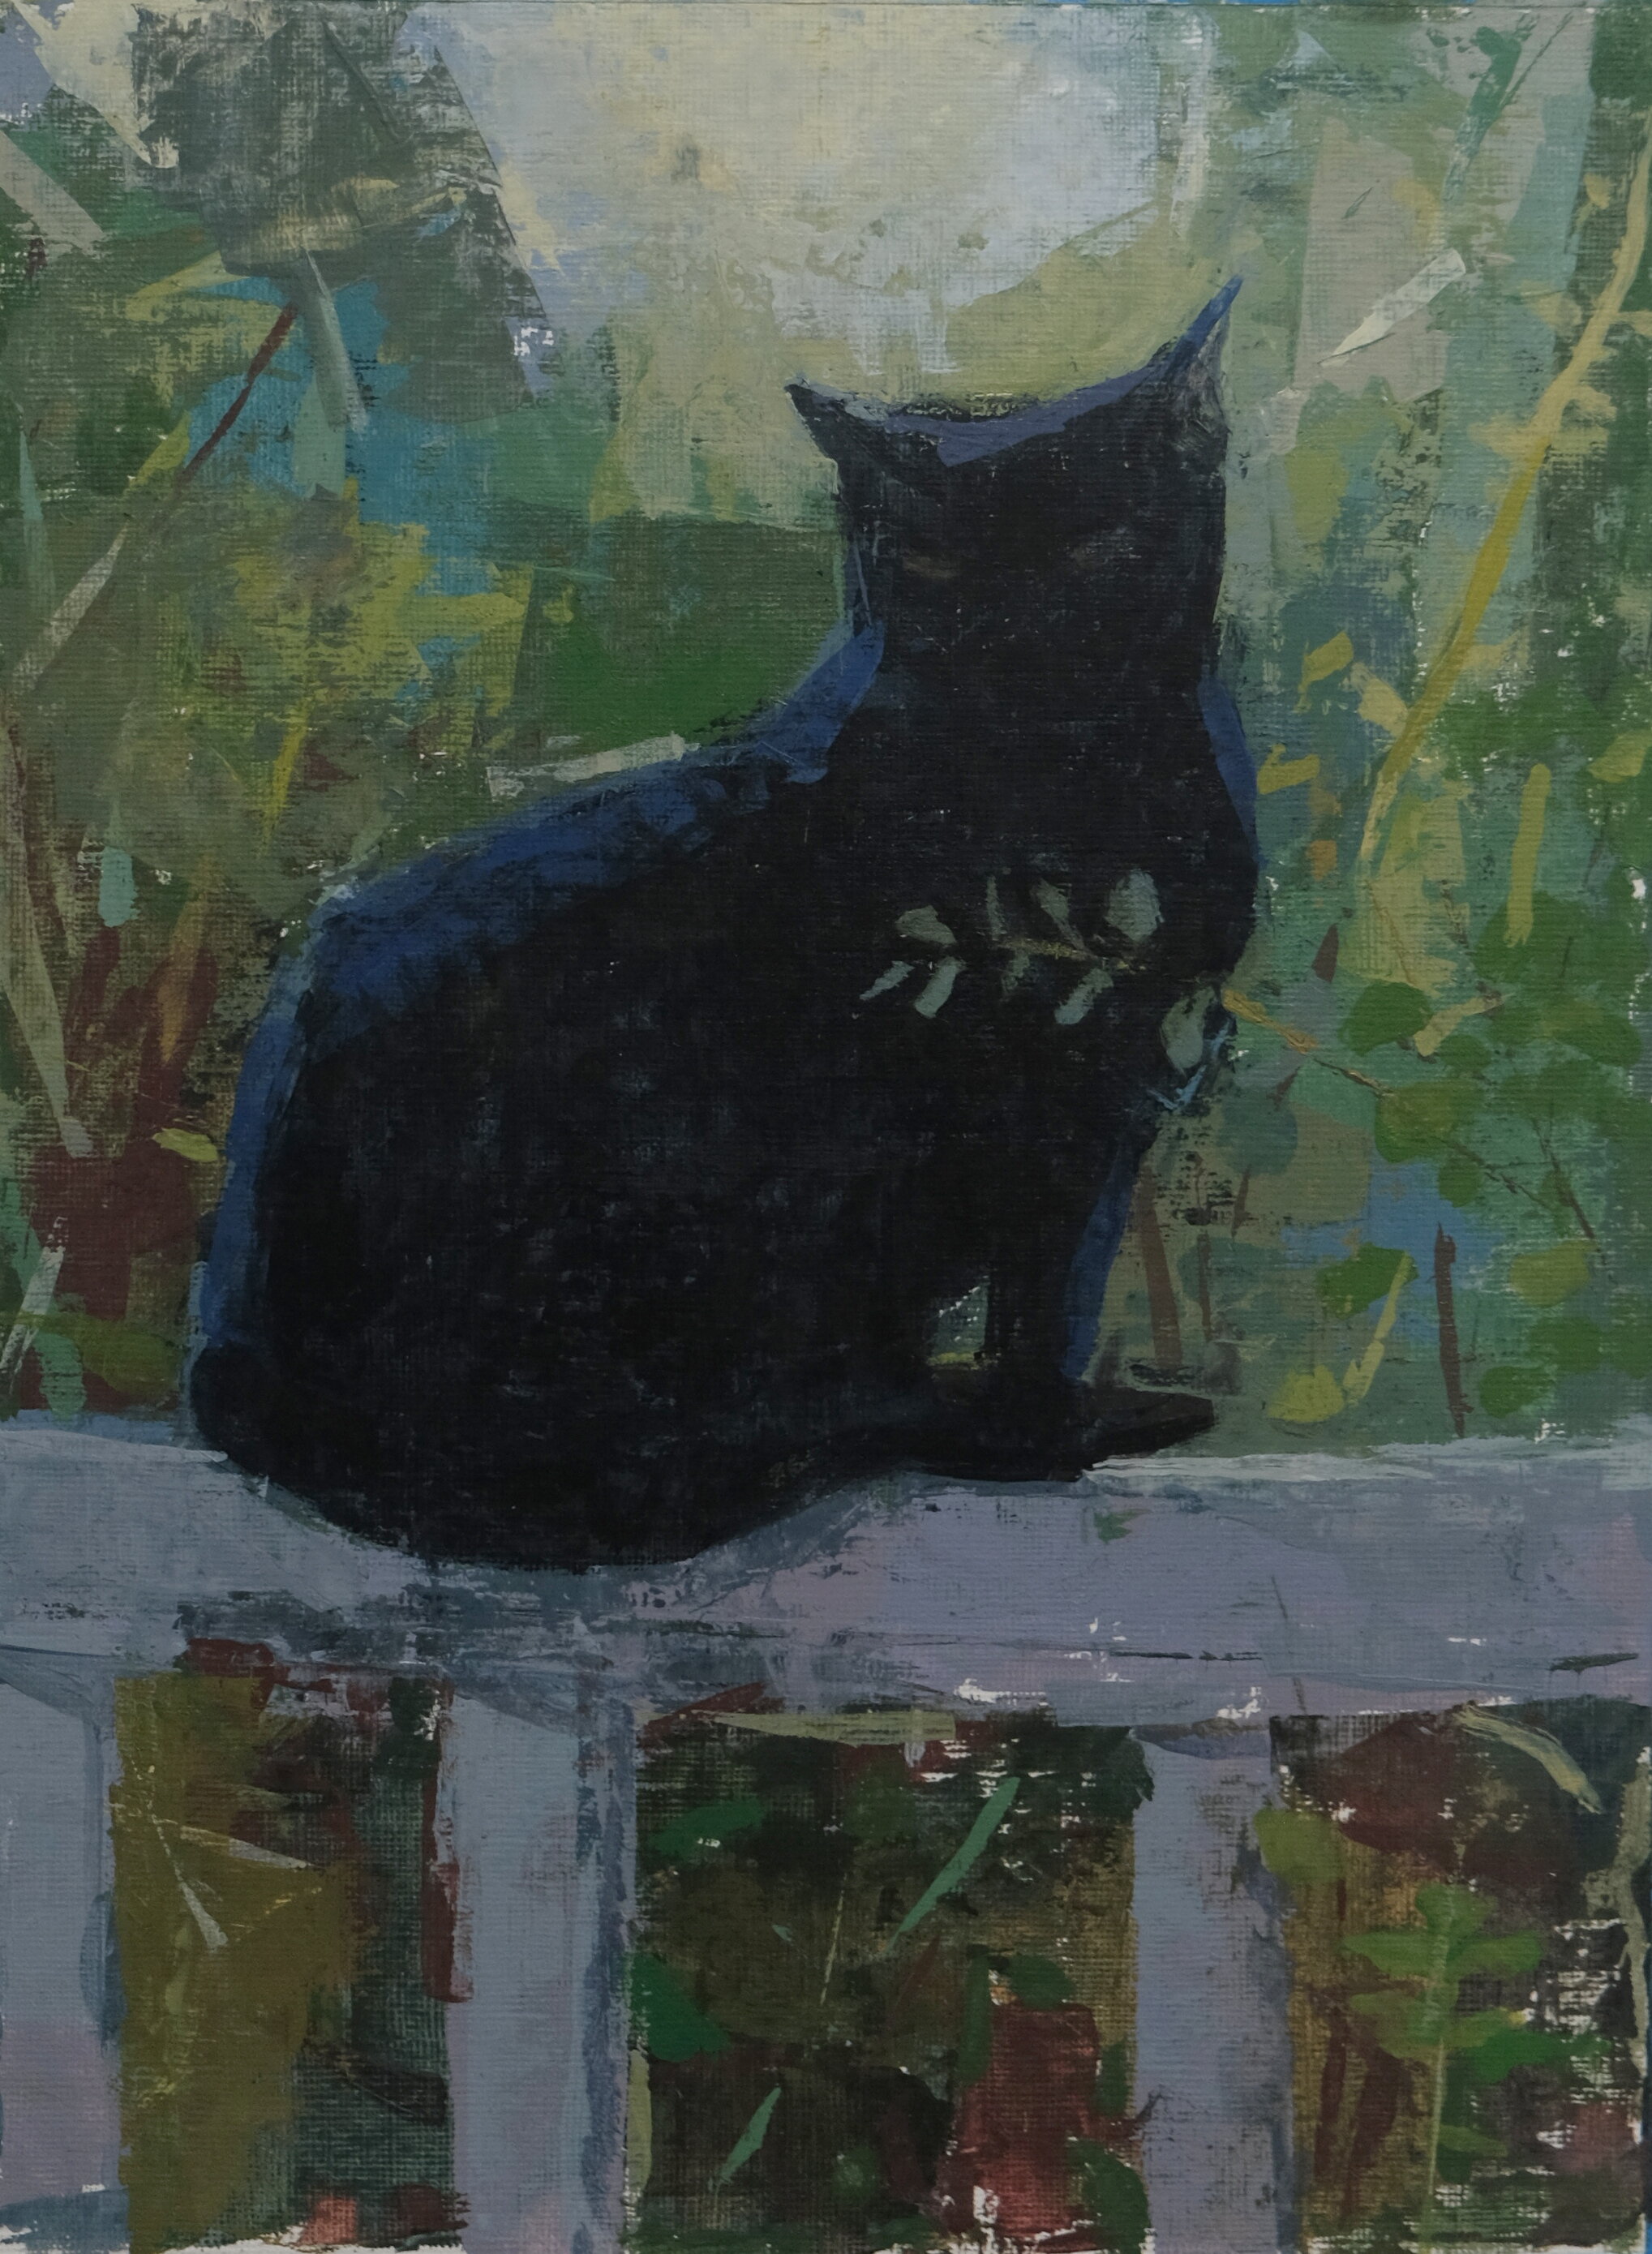 Cat on the Railing 9 x 12 inches acrylic on paper amy scherer.JPG